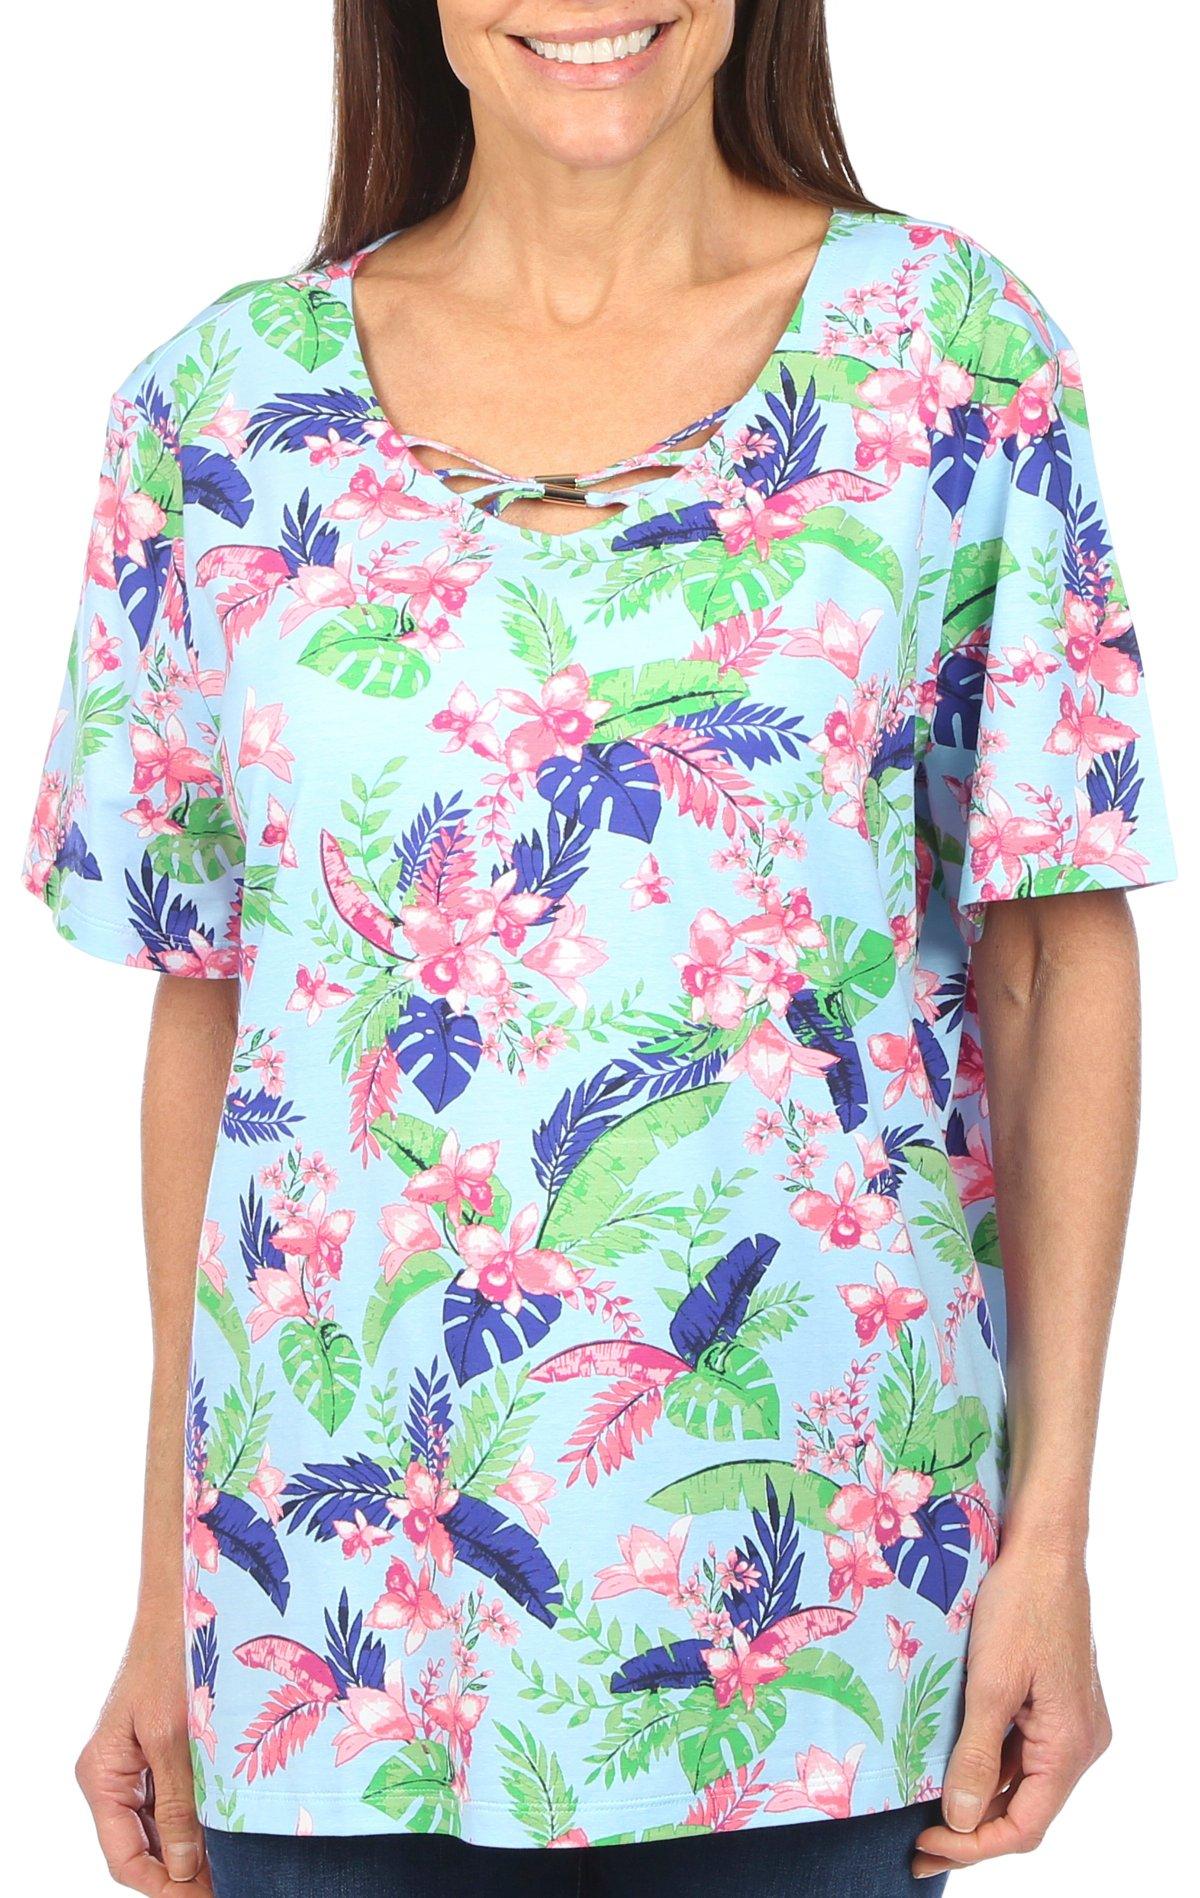 Coral Bay Womens Crisscross Bars Floral Print Sleeve Top